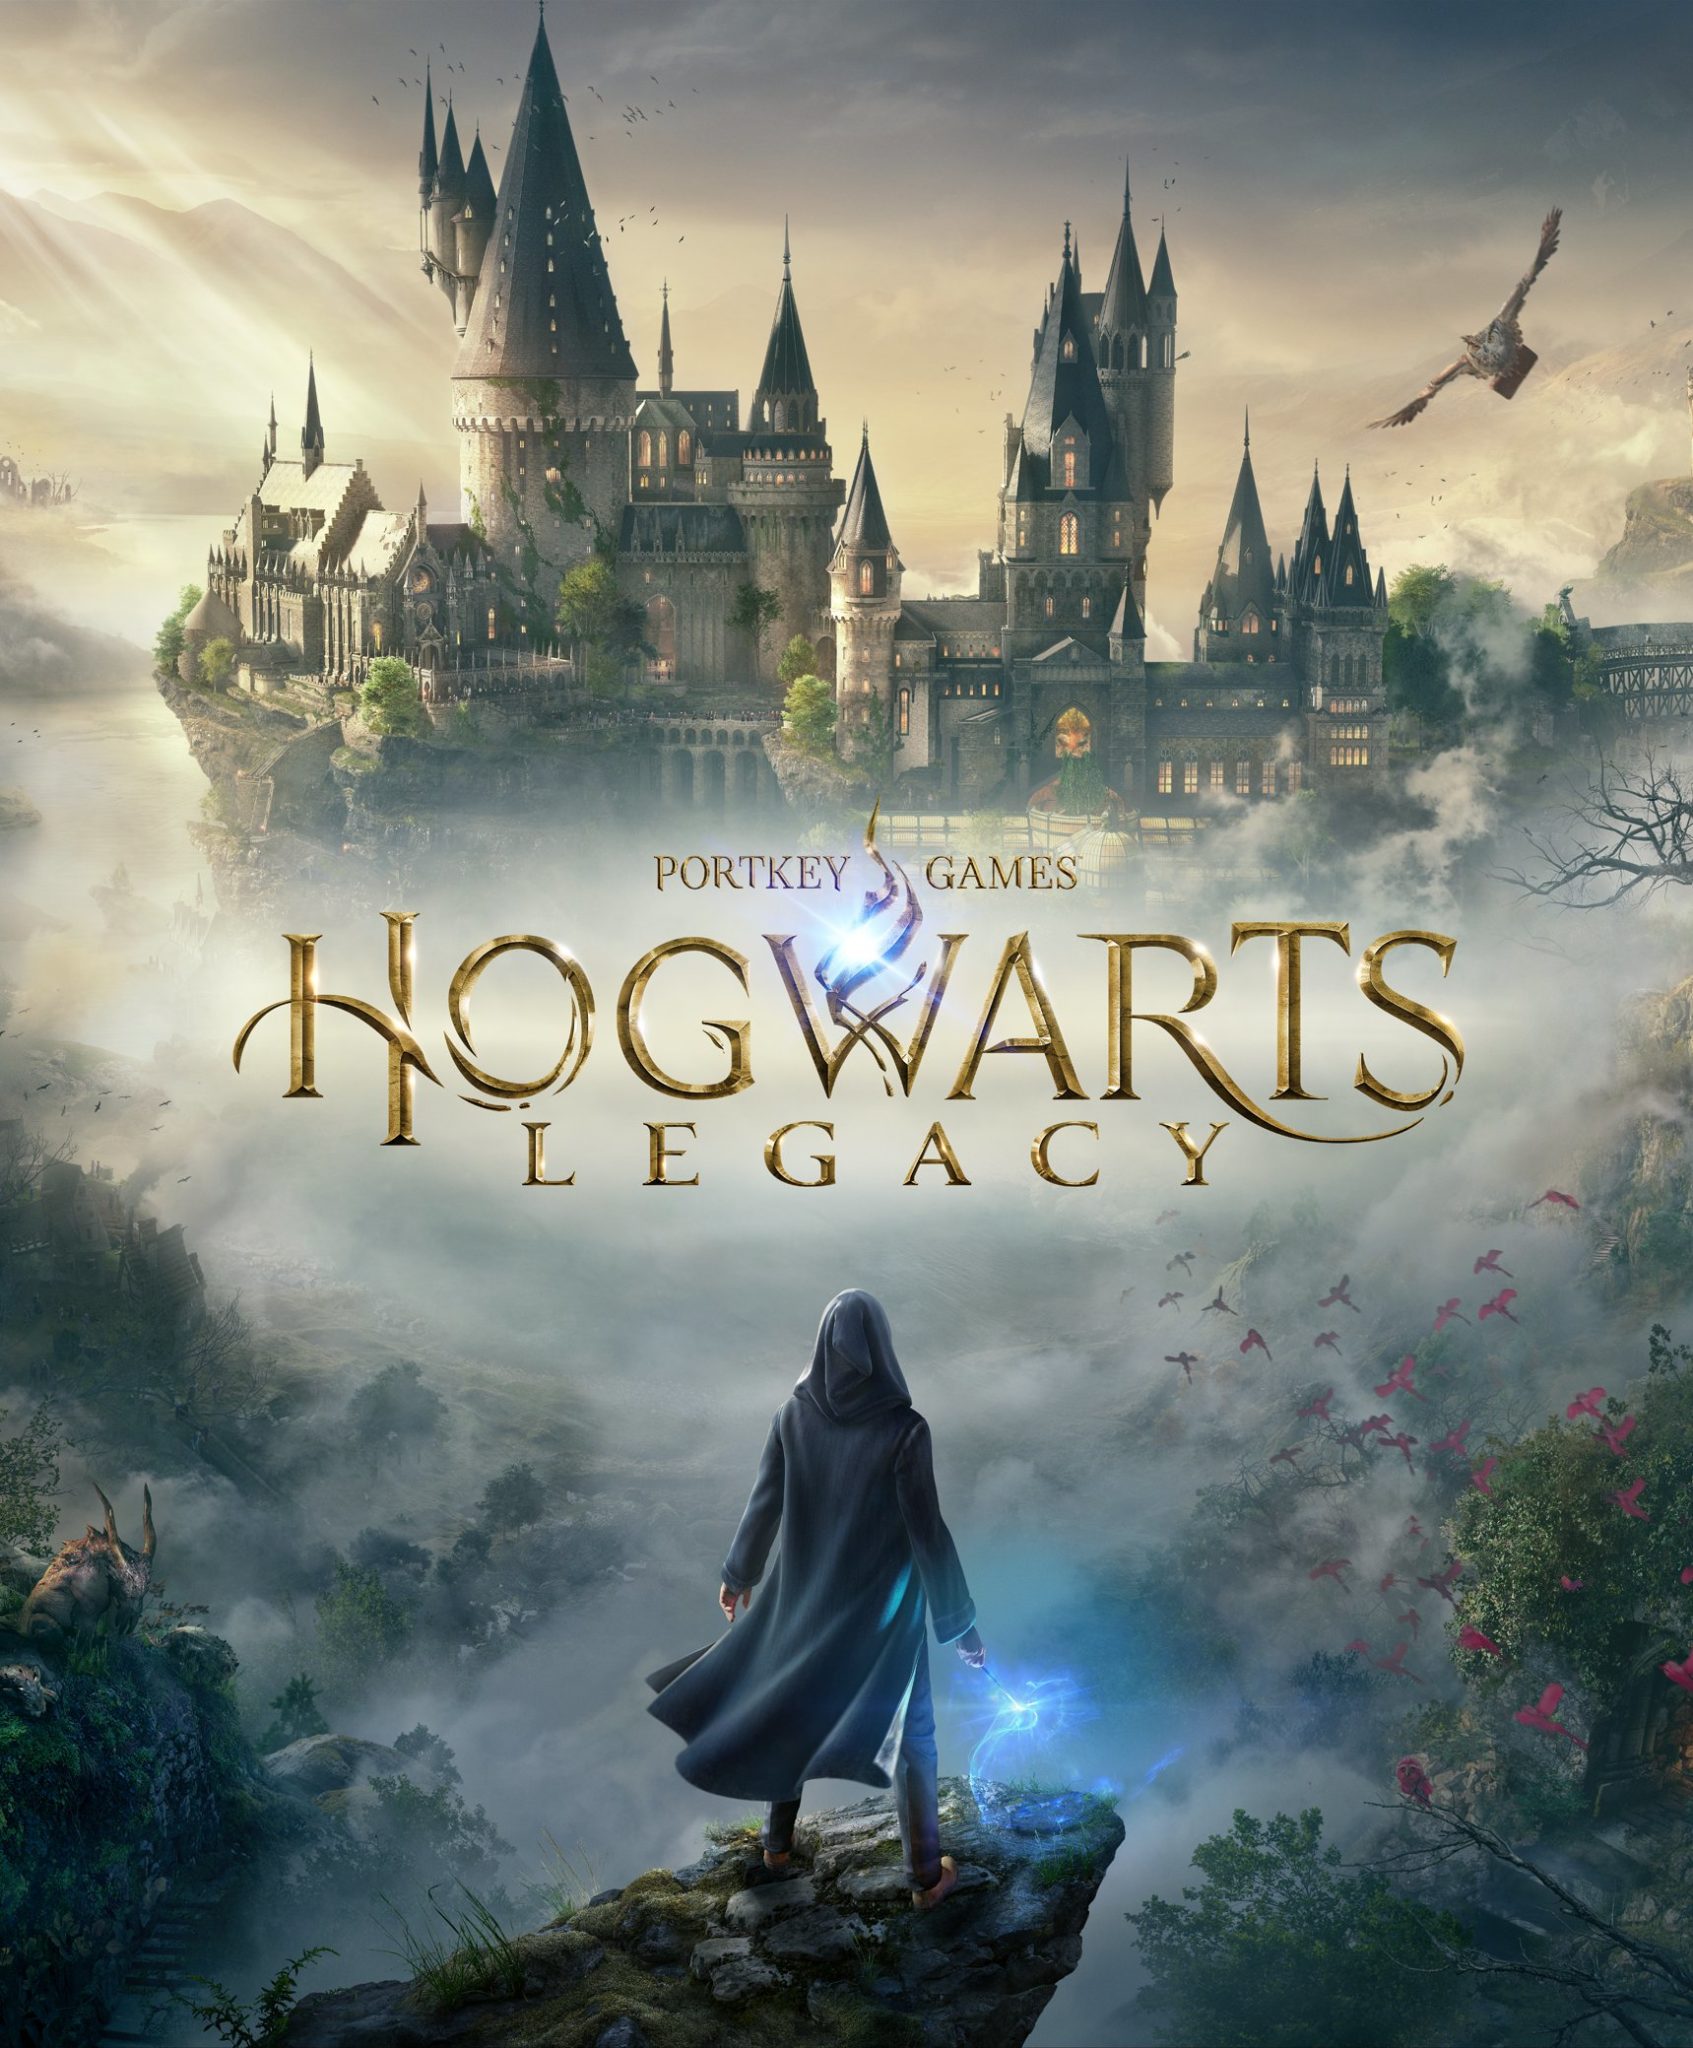 hogwarts legacy when is it coming out